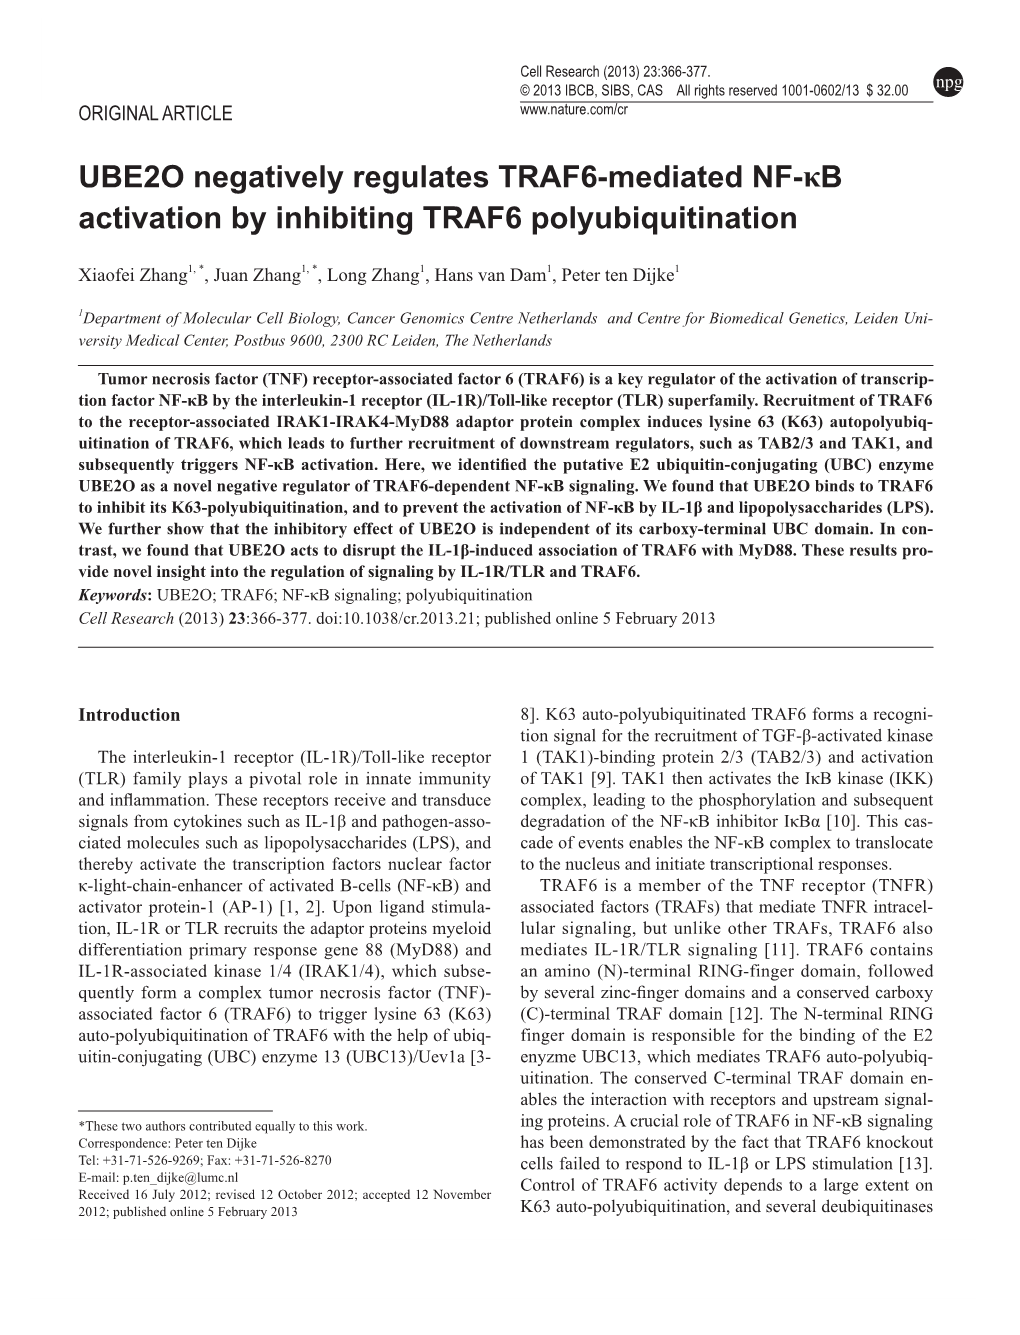 UBE2O Negatively Regulates TRAF6-Mediated NF-Κb Activation by Inhibiting TRAF6 Polyubiquitination